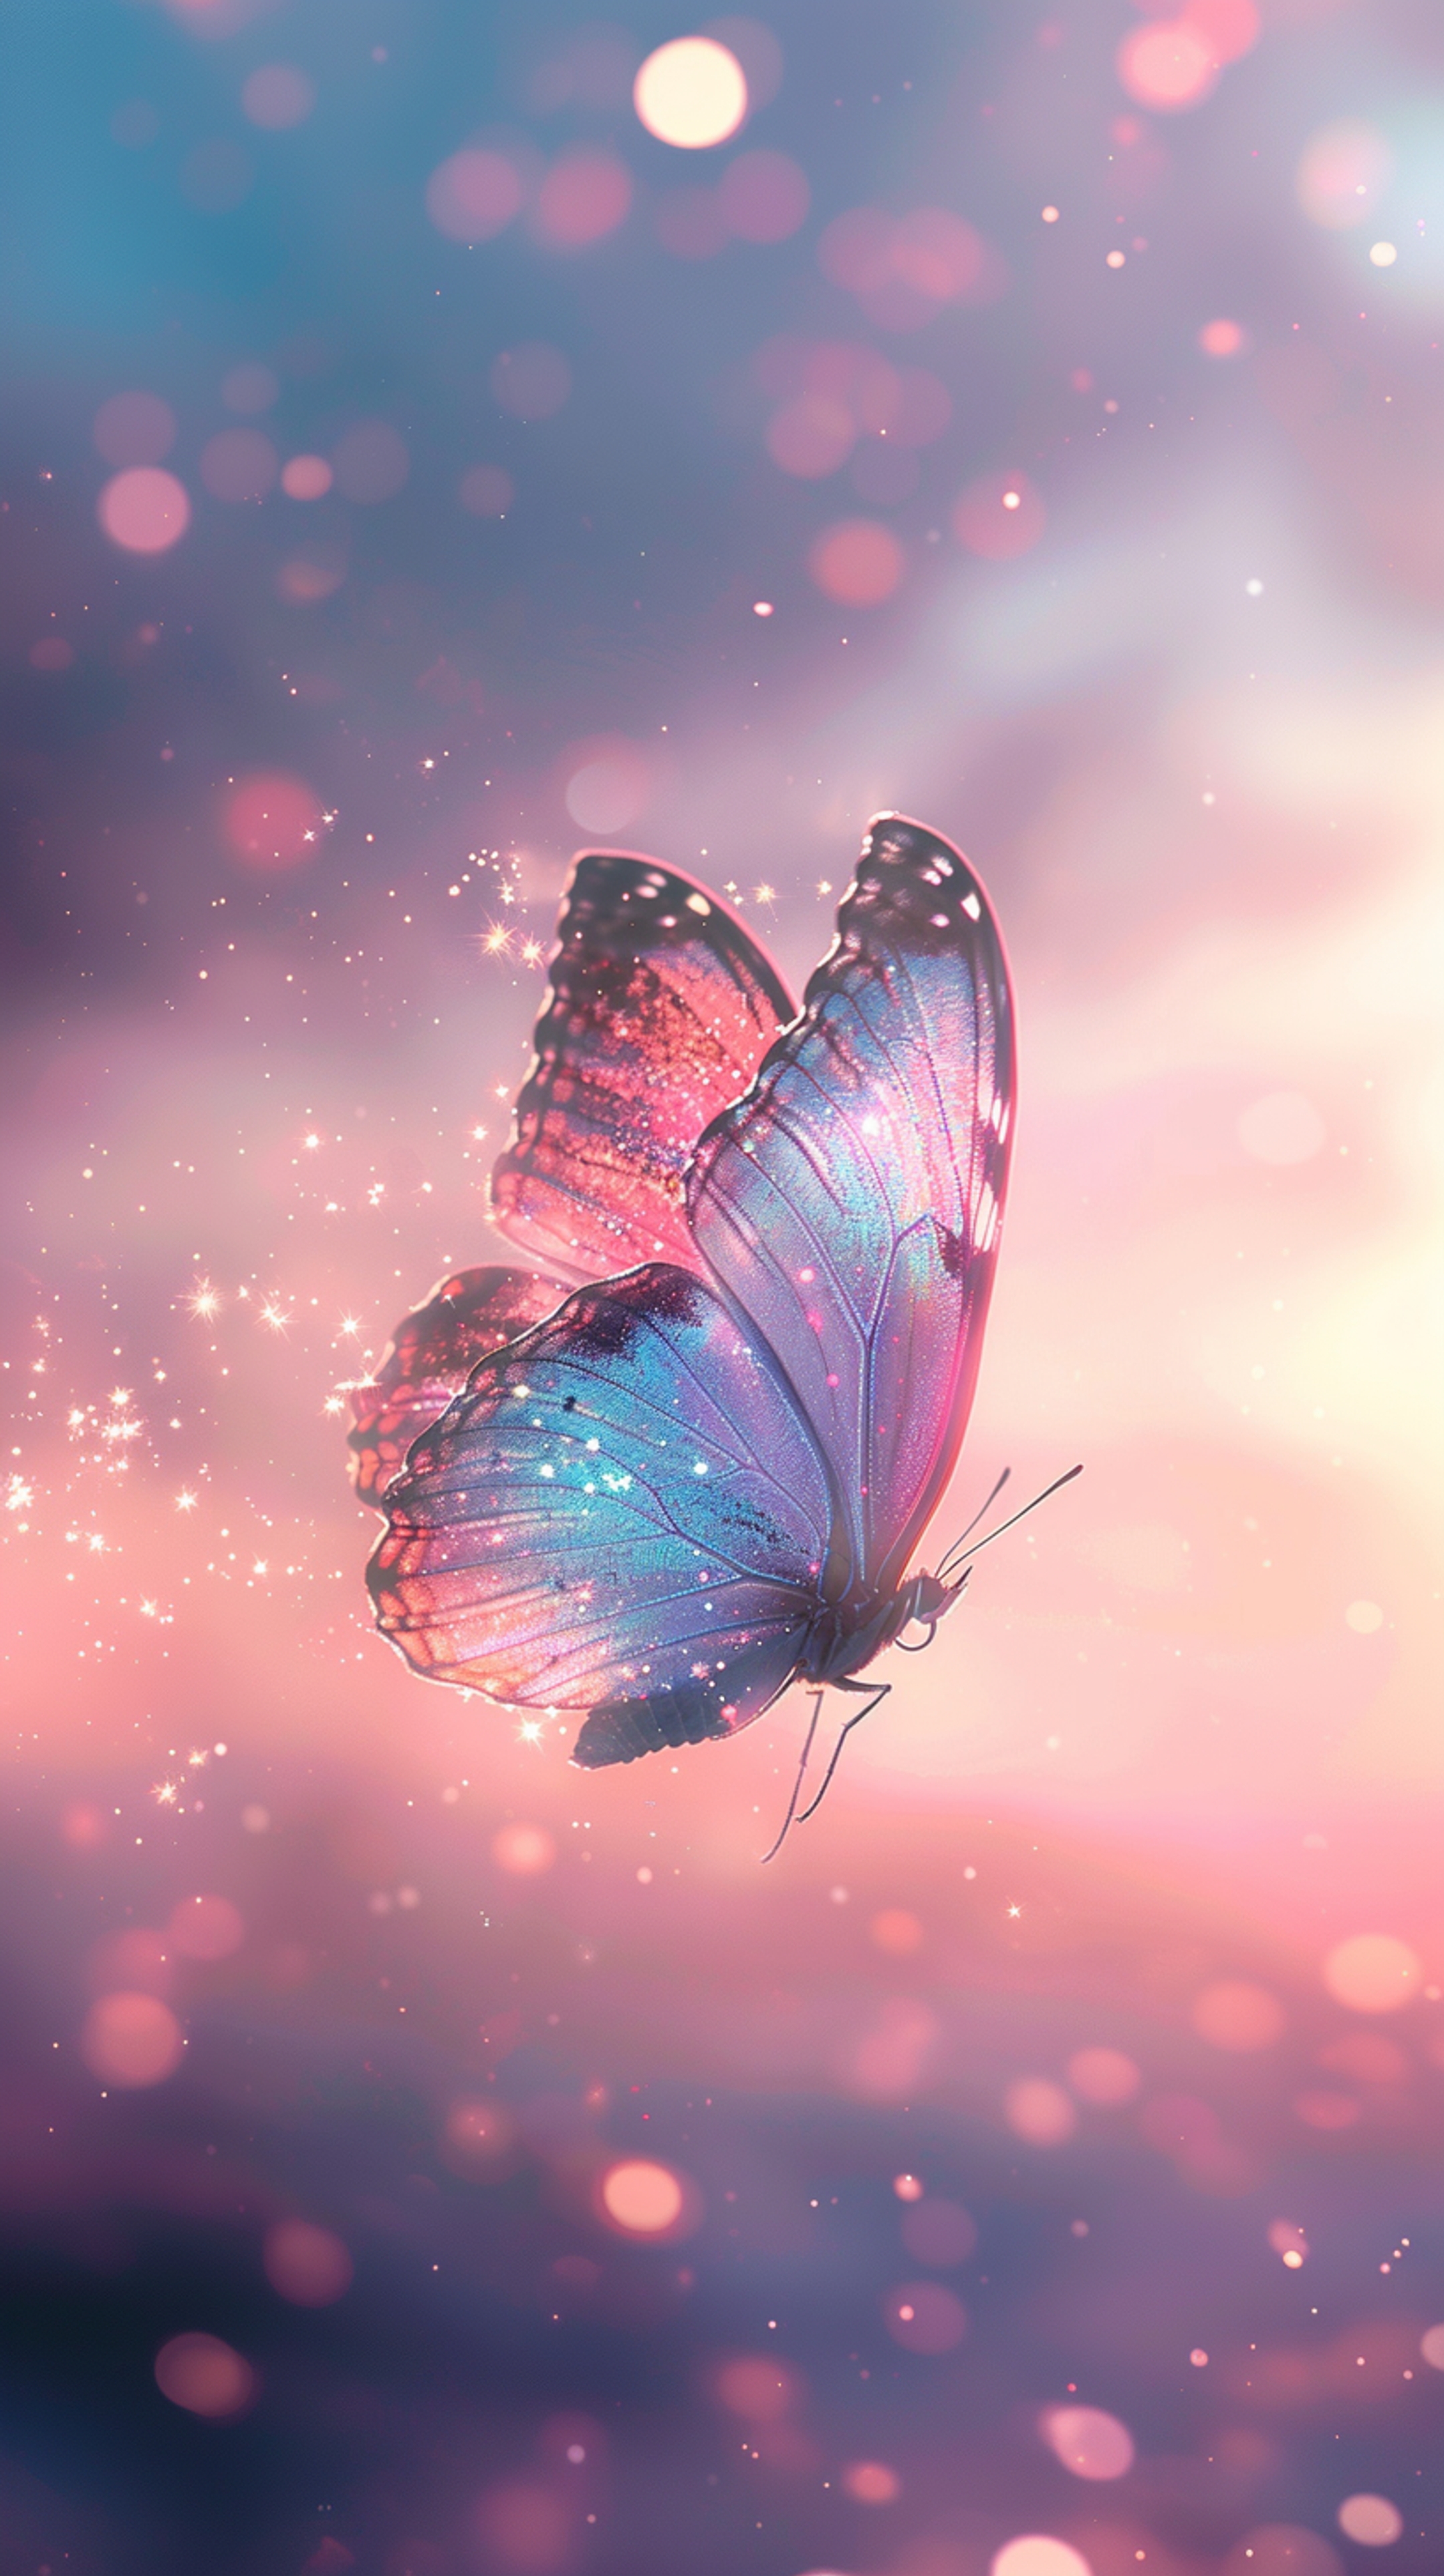 Magical Sparkling Butterfly in Dreamy Pink Sky Тапет[1278b2409cd84640a5d9]